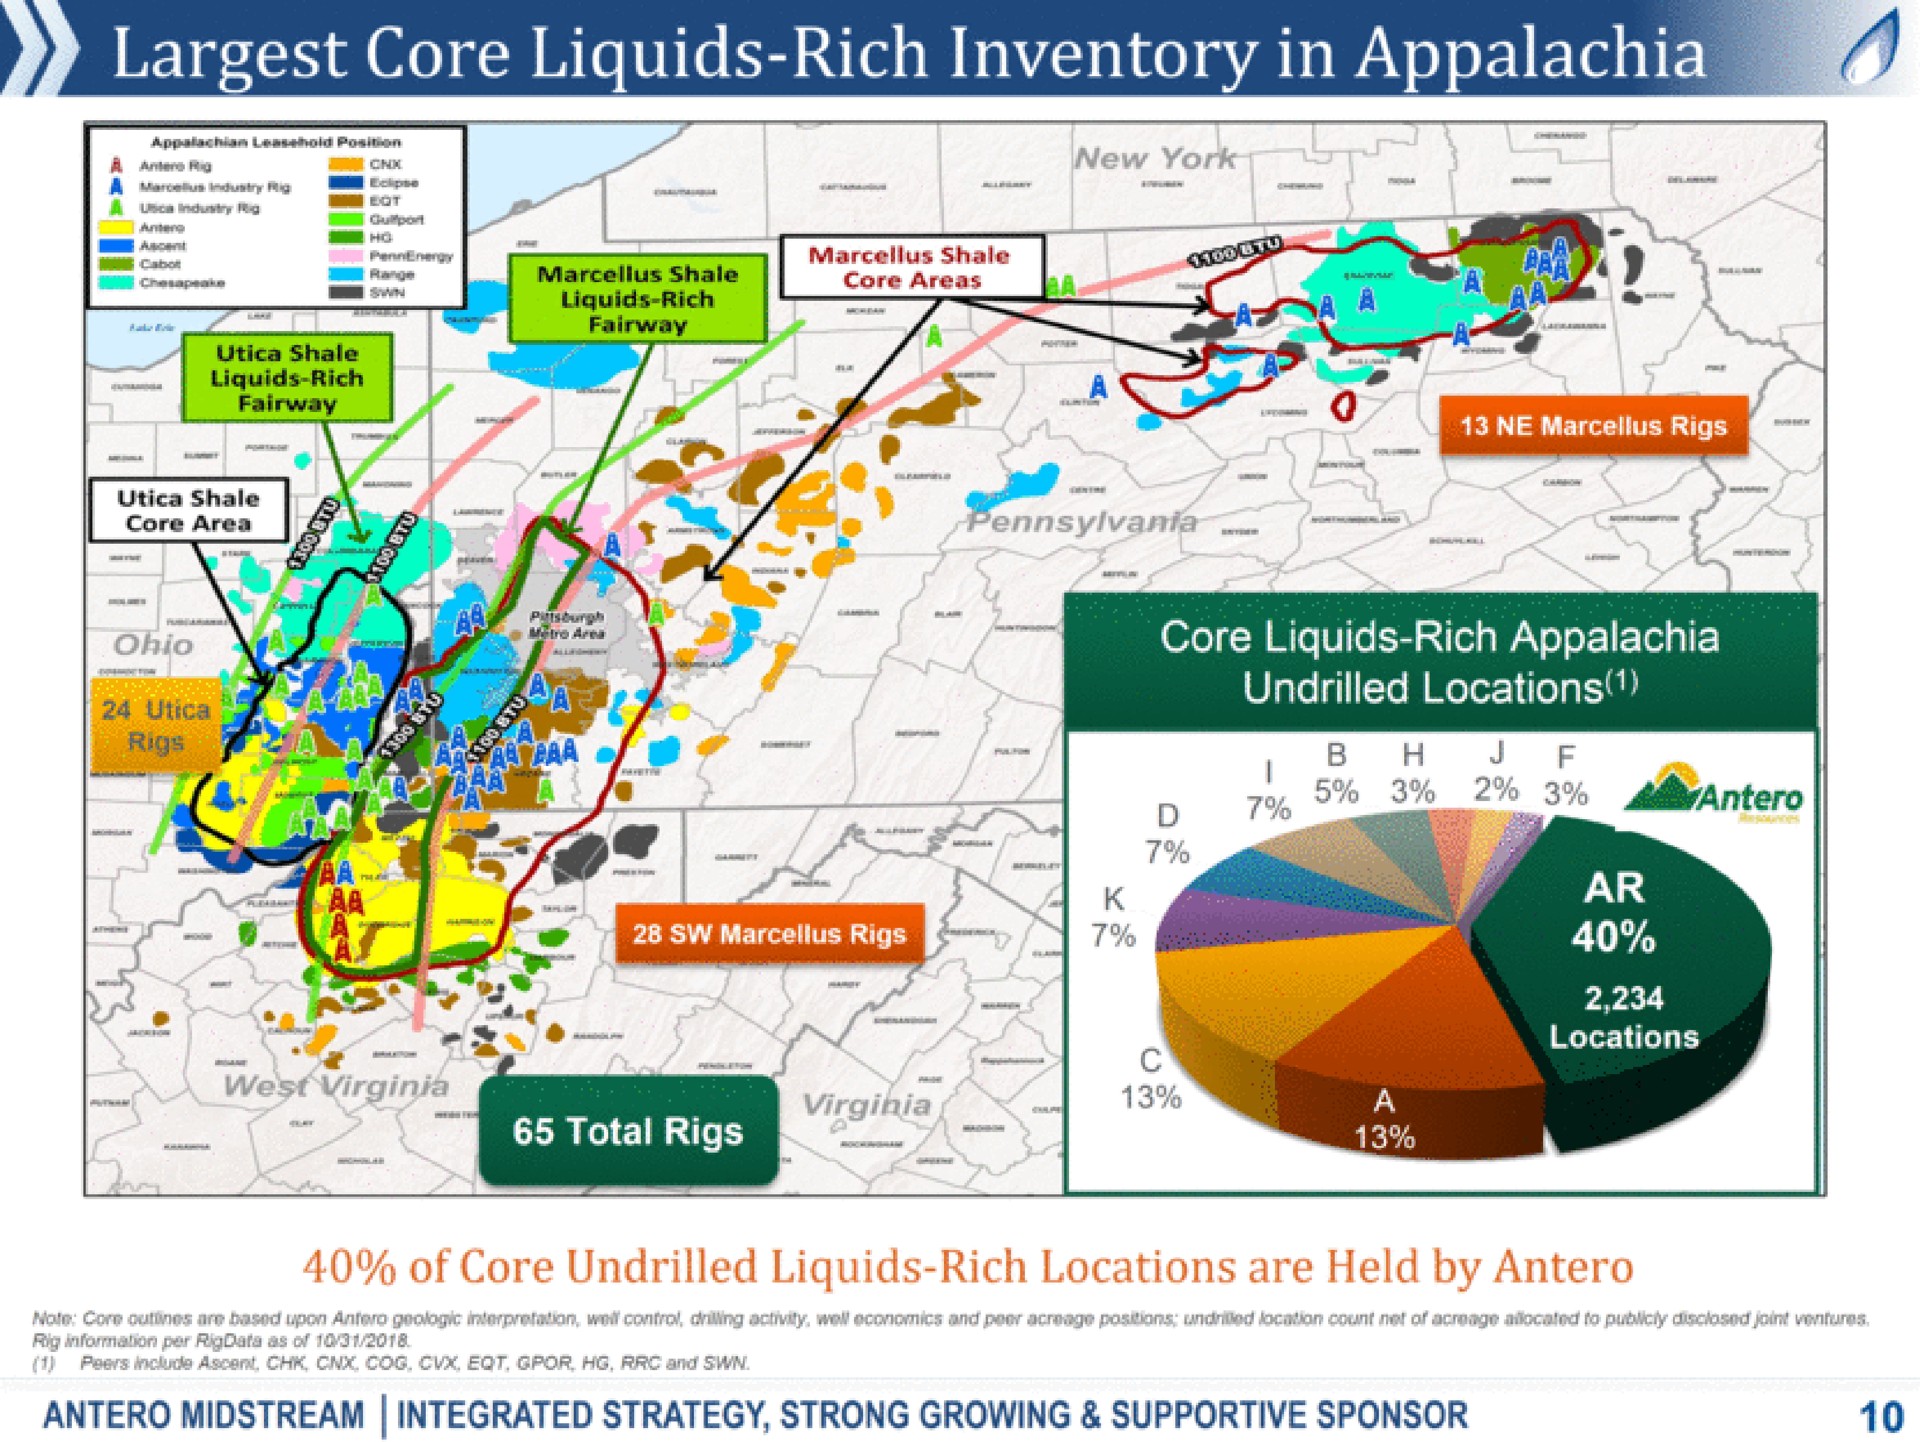 core liquids rich inventory in a pia peek tear new york are core liquids rich undrilled locations total rigs locations virgin of core sas rich locations are held by peers rig per as of i wan cling and we beet acreage count nef of acreage disclosed ventures midstream integrated strategy strong growing supportive sponsor | Antero Midstream Partners